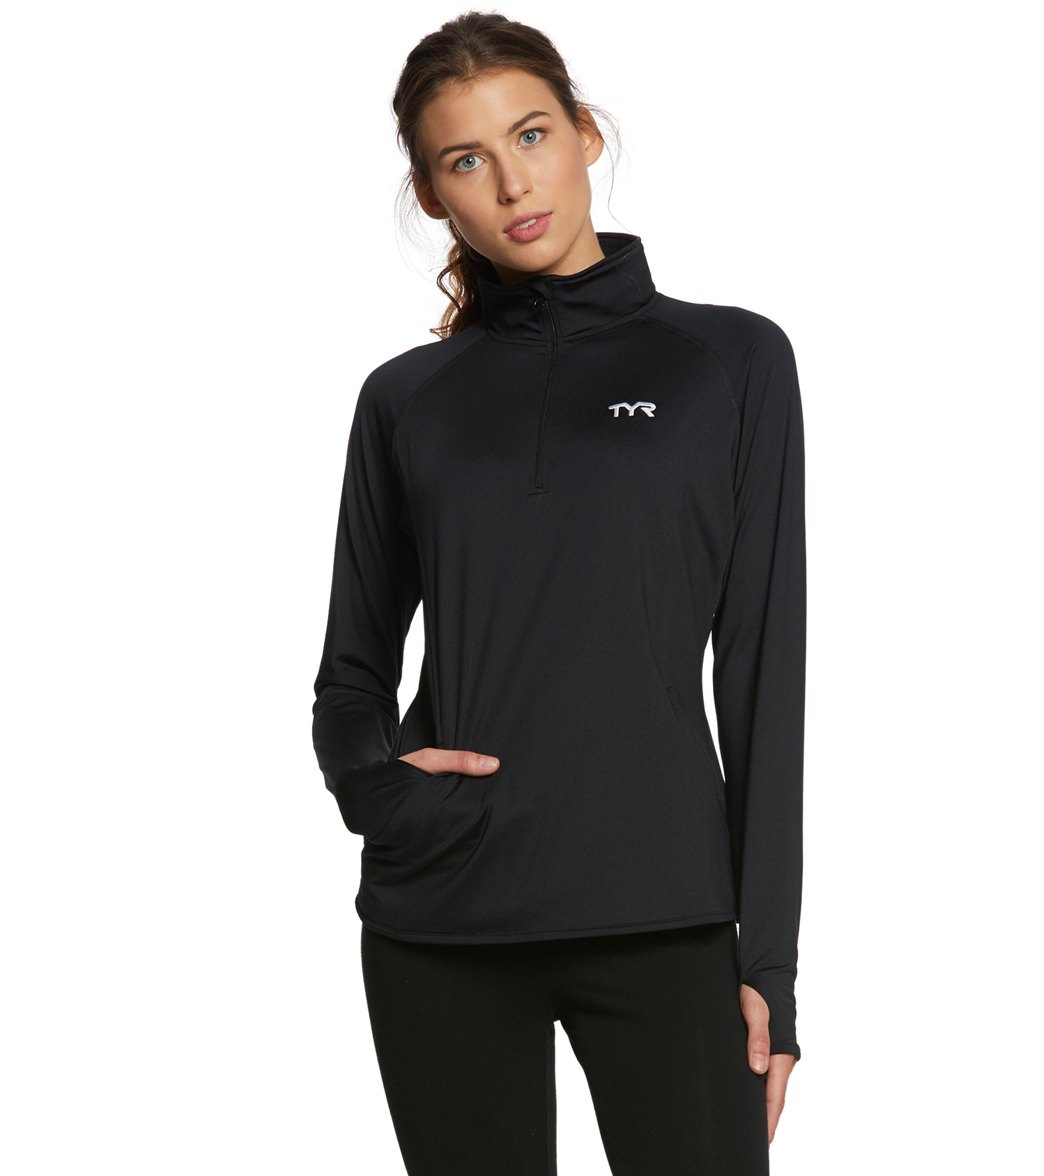 TYR Women's Alliance 1/4 Zip Pullover Warm Up Jacket - Black X-Small Polyester/Spandex - Swimoutlet.com